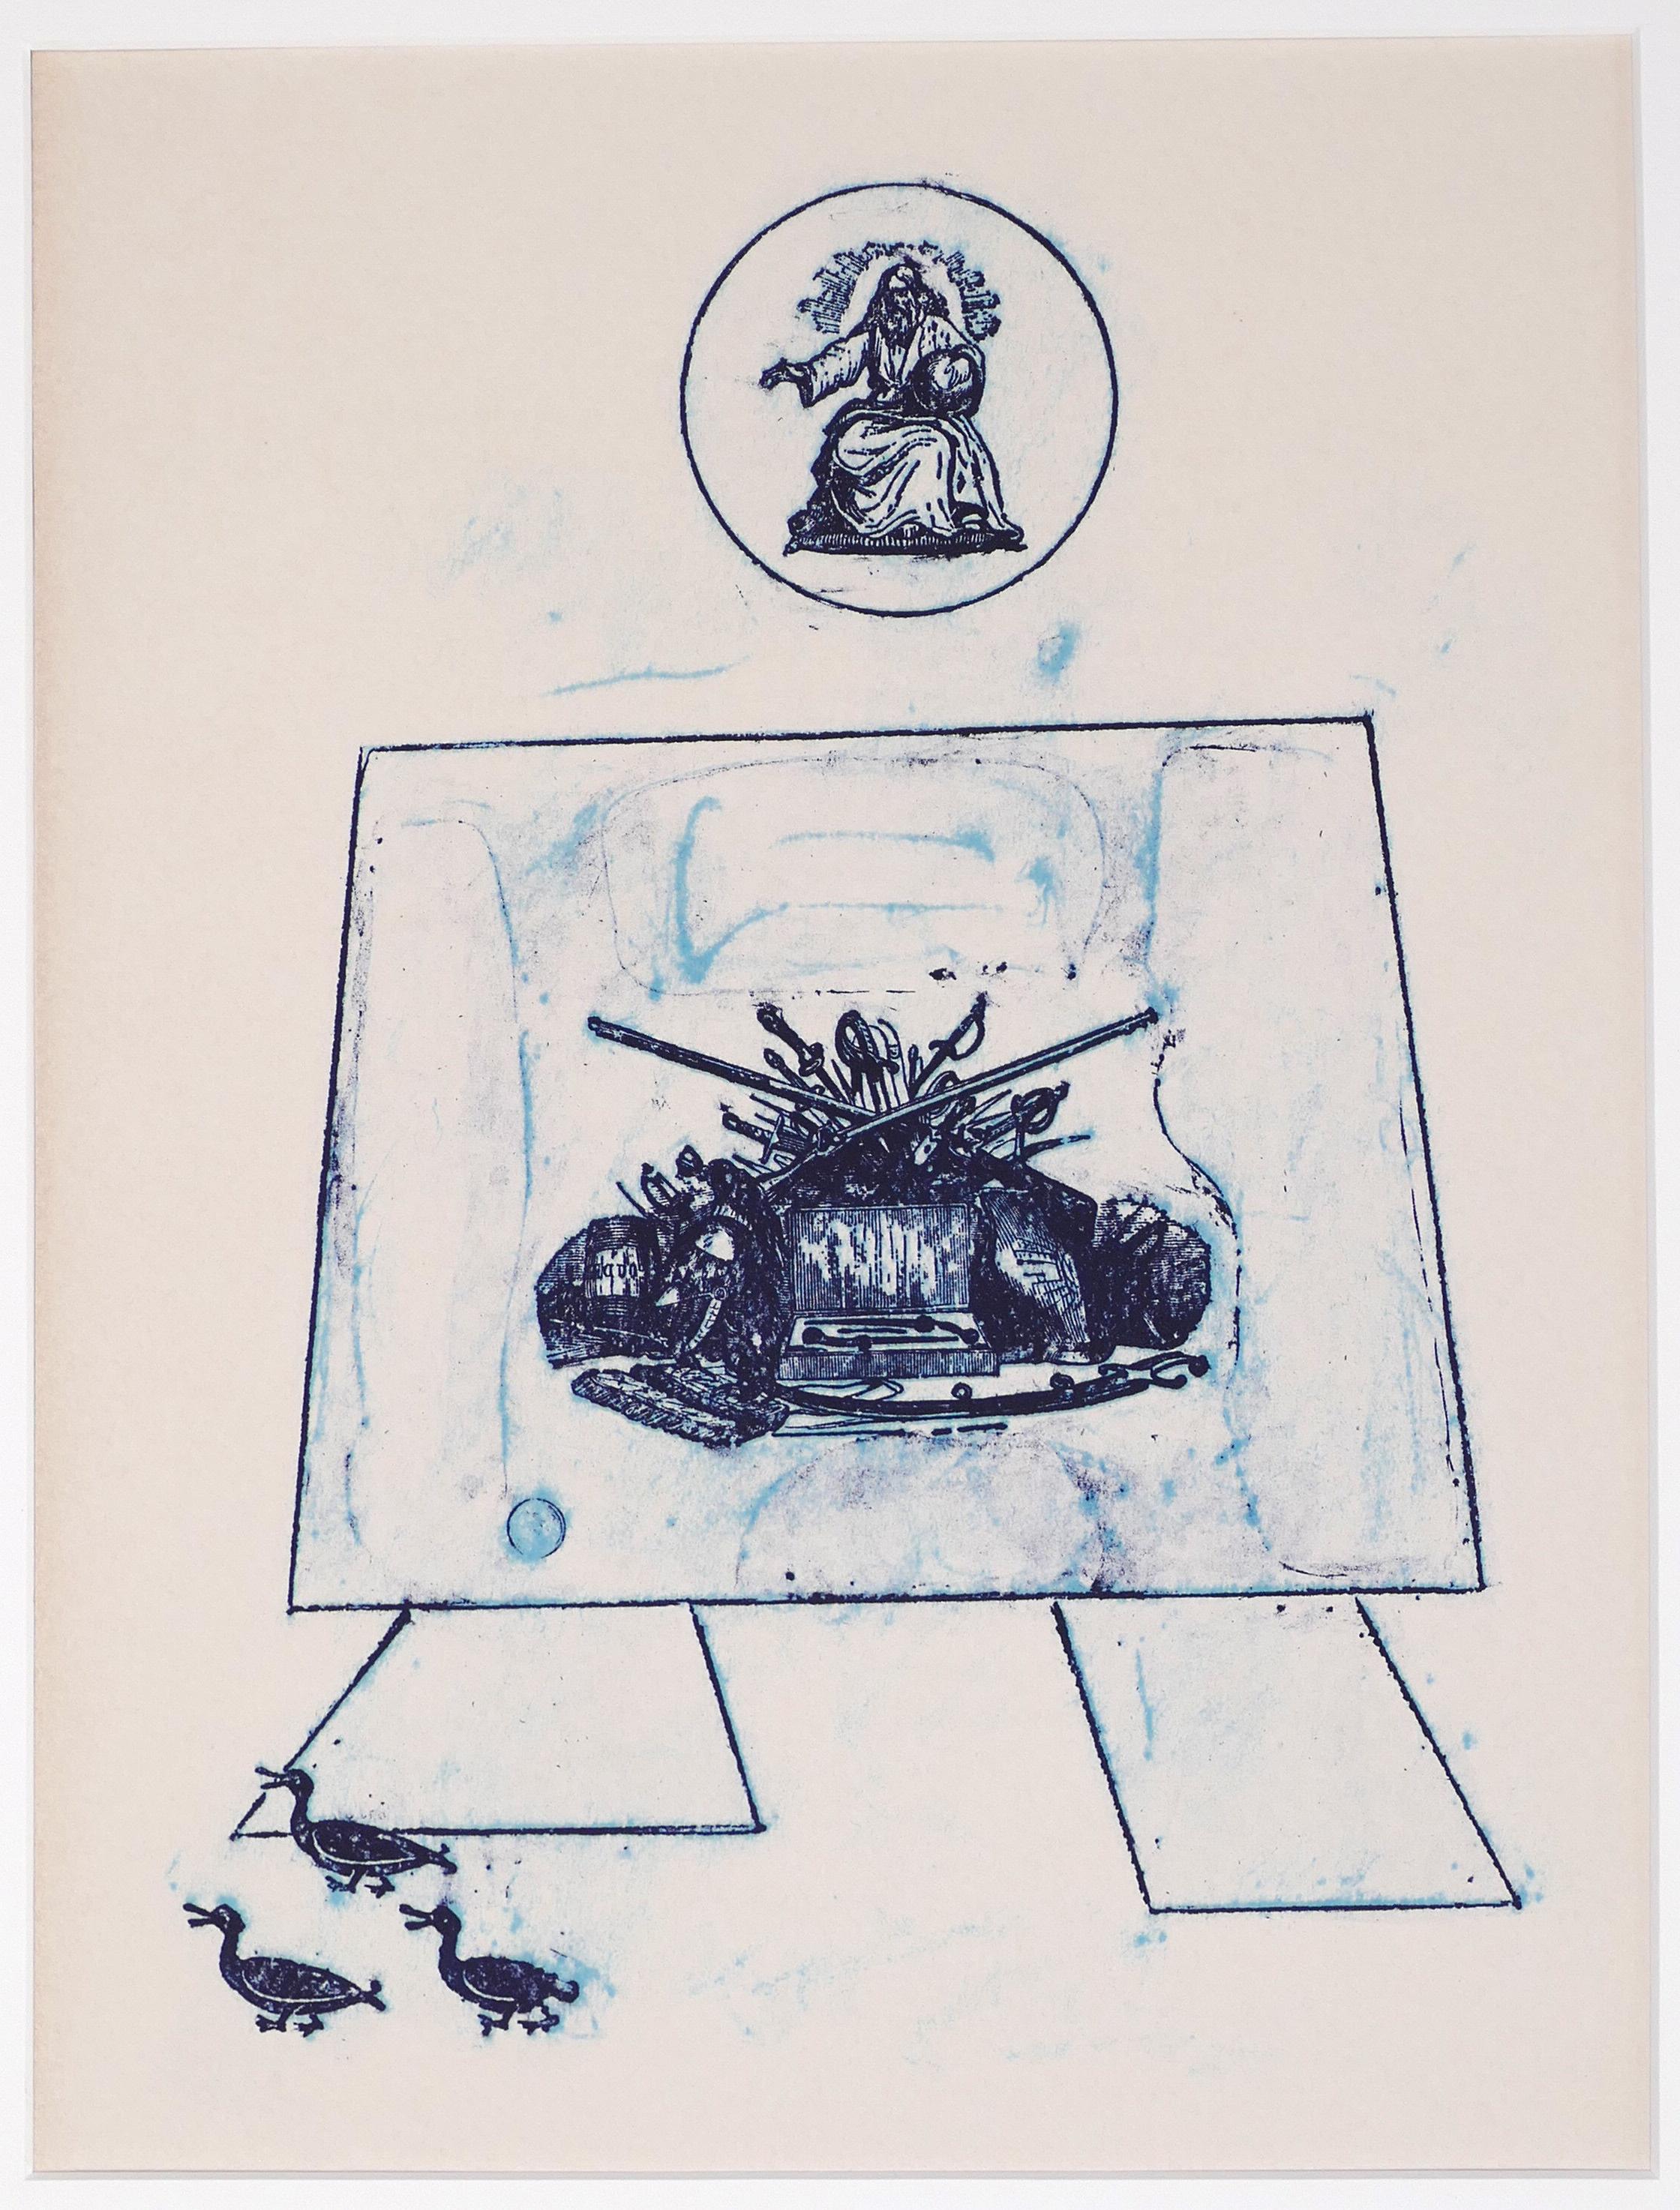 Dance of Soldiers (Original title "Ballade des Soldaten") is an original work realized in 1972 by Max Ernst (1891 - 1976).

Original Lithograph on paper. 

Excellent conditions. 

Beautiful lithograph in a few colors depicting a surrealist